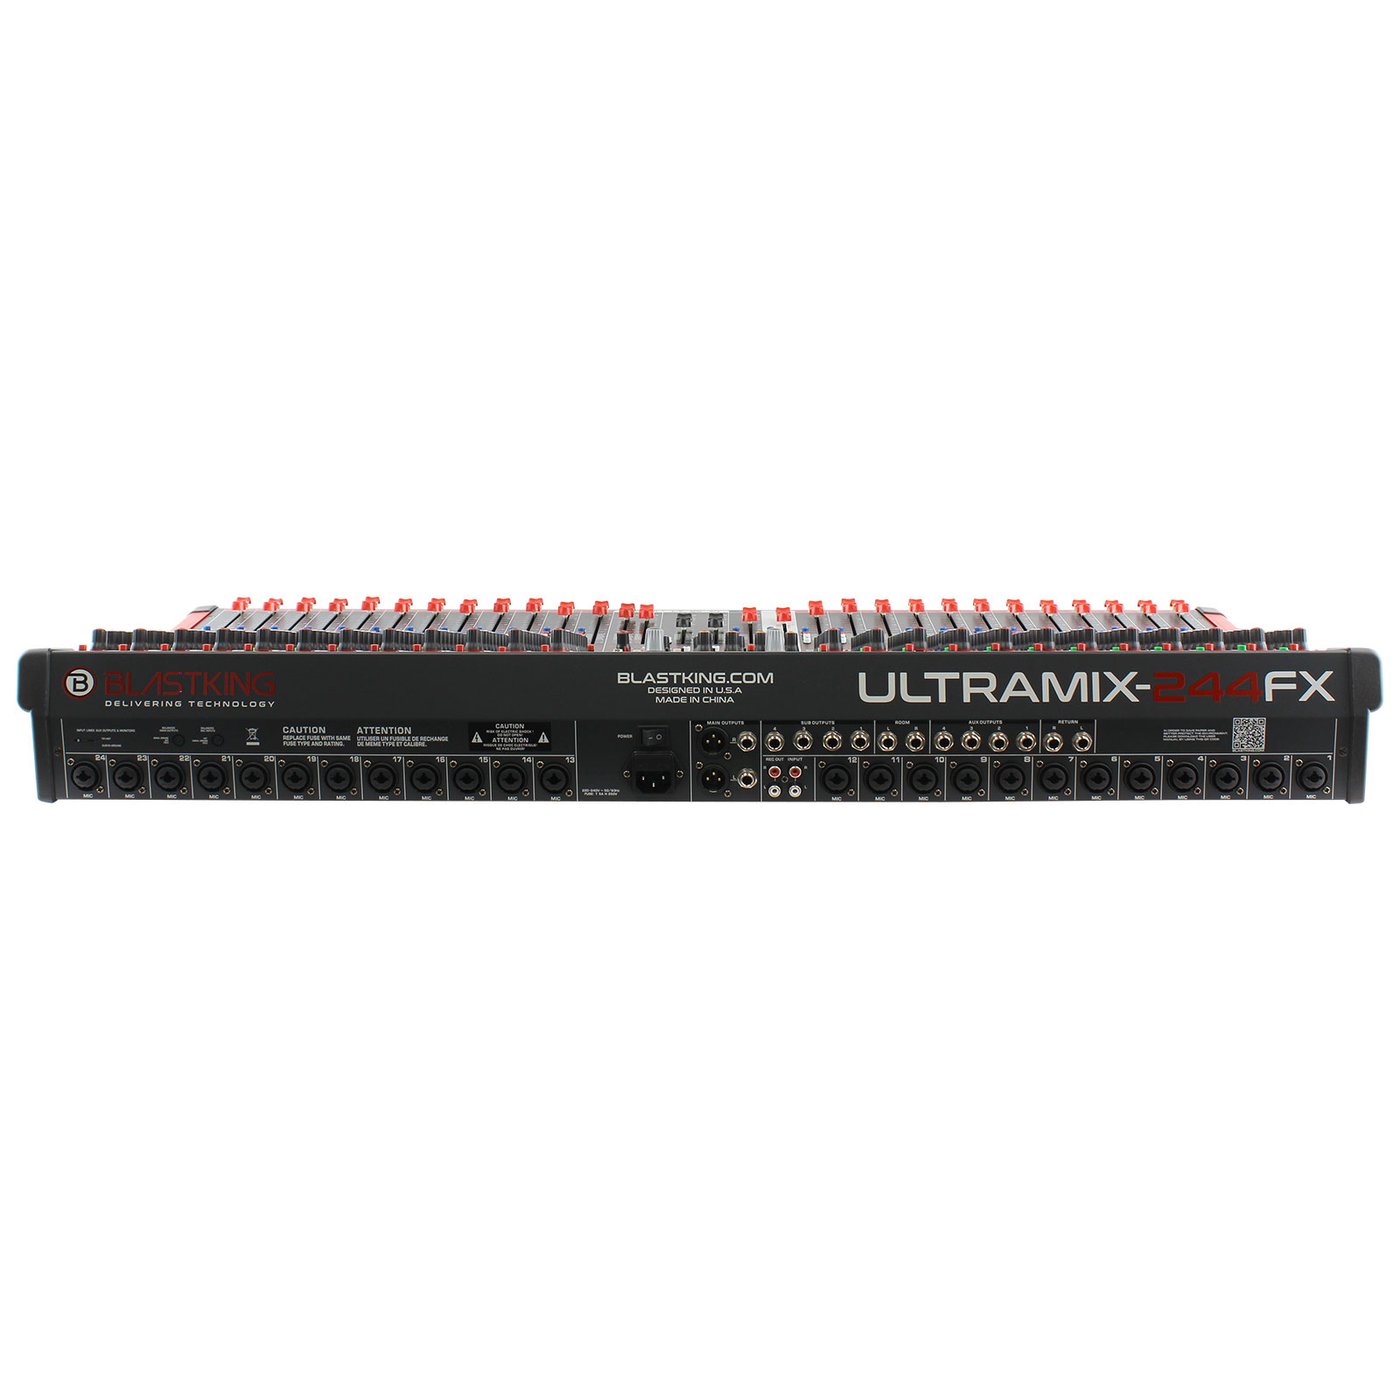 Blastking ULTRAMIX-244FX 24 Channel Analog Stereo Mixing Console